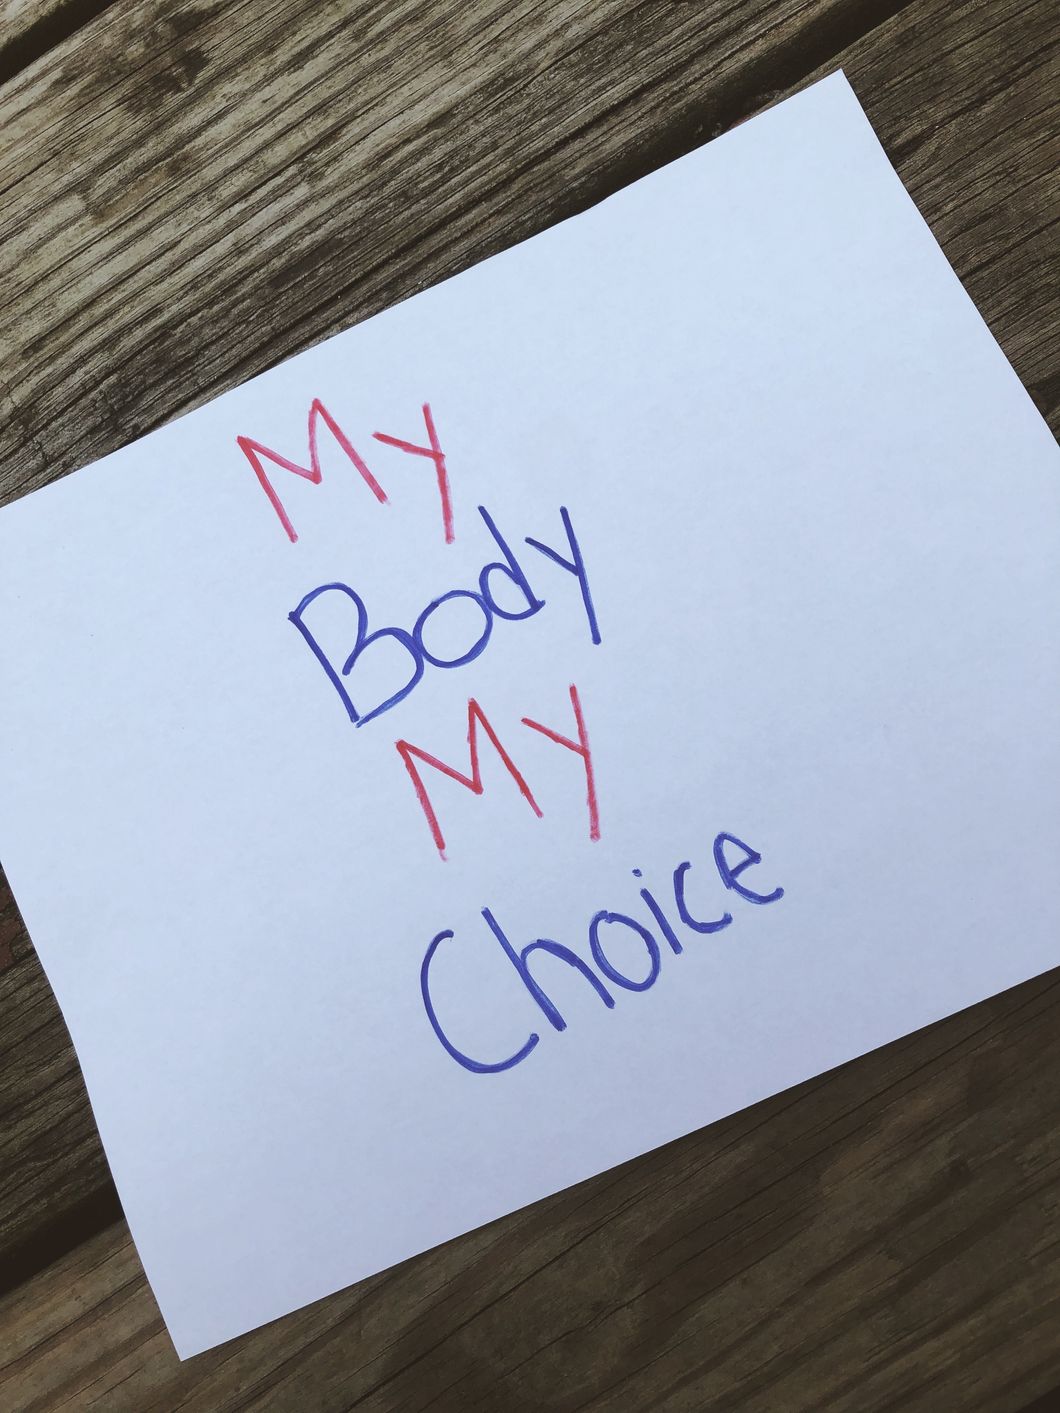 I'm An 18-Year-Old Woman And Thanks To Those Abortion Bans, My Body Isn't Mine Anymore